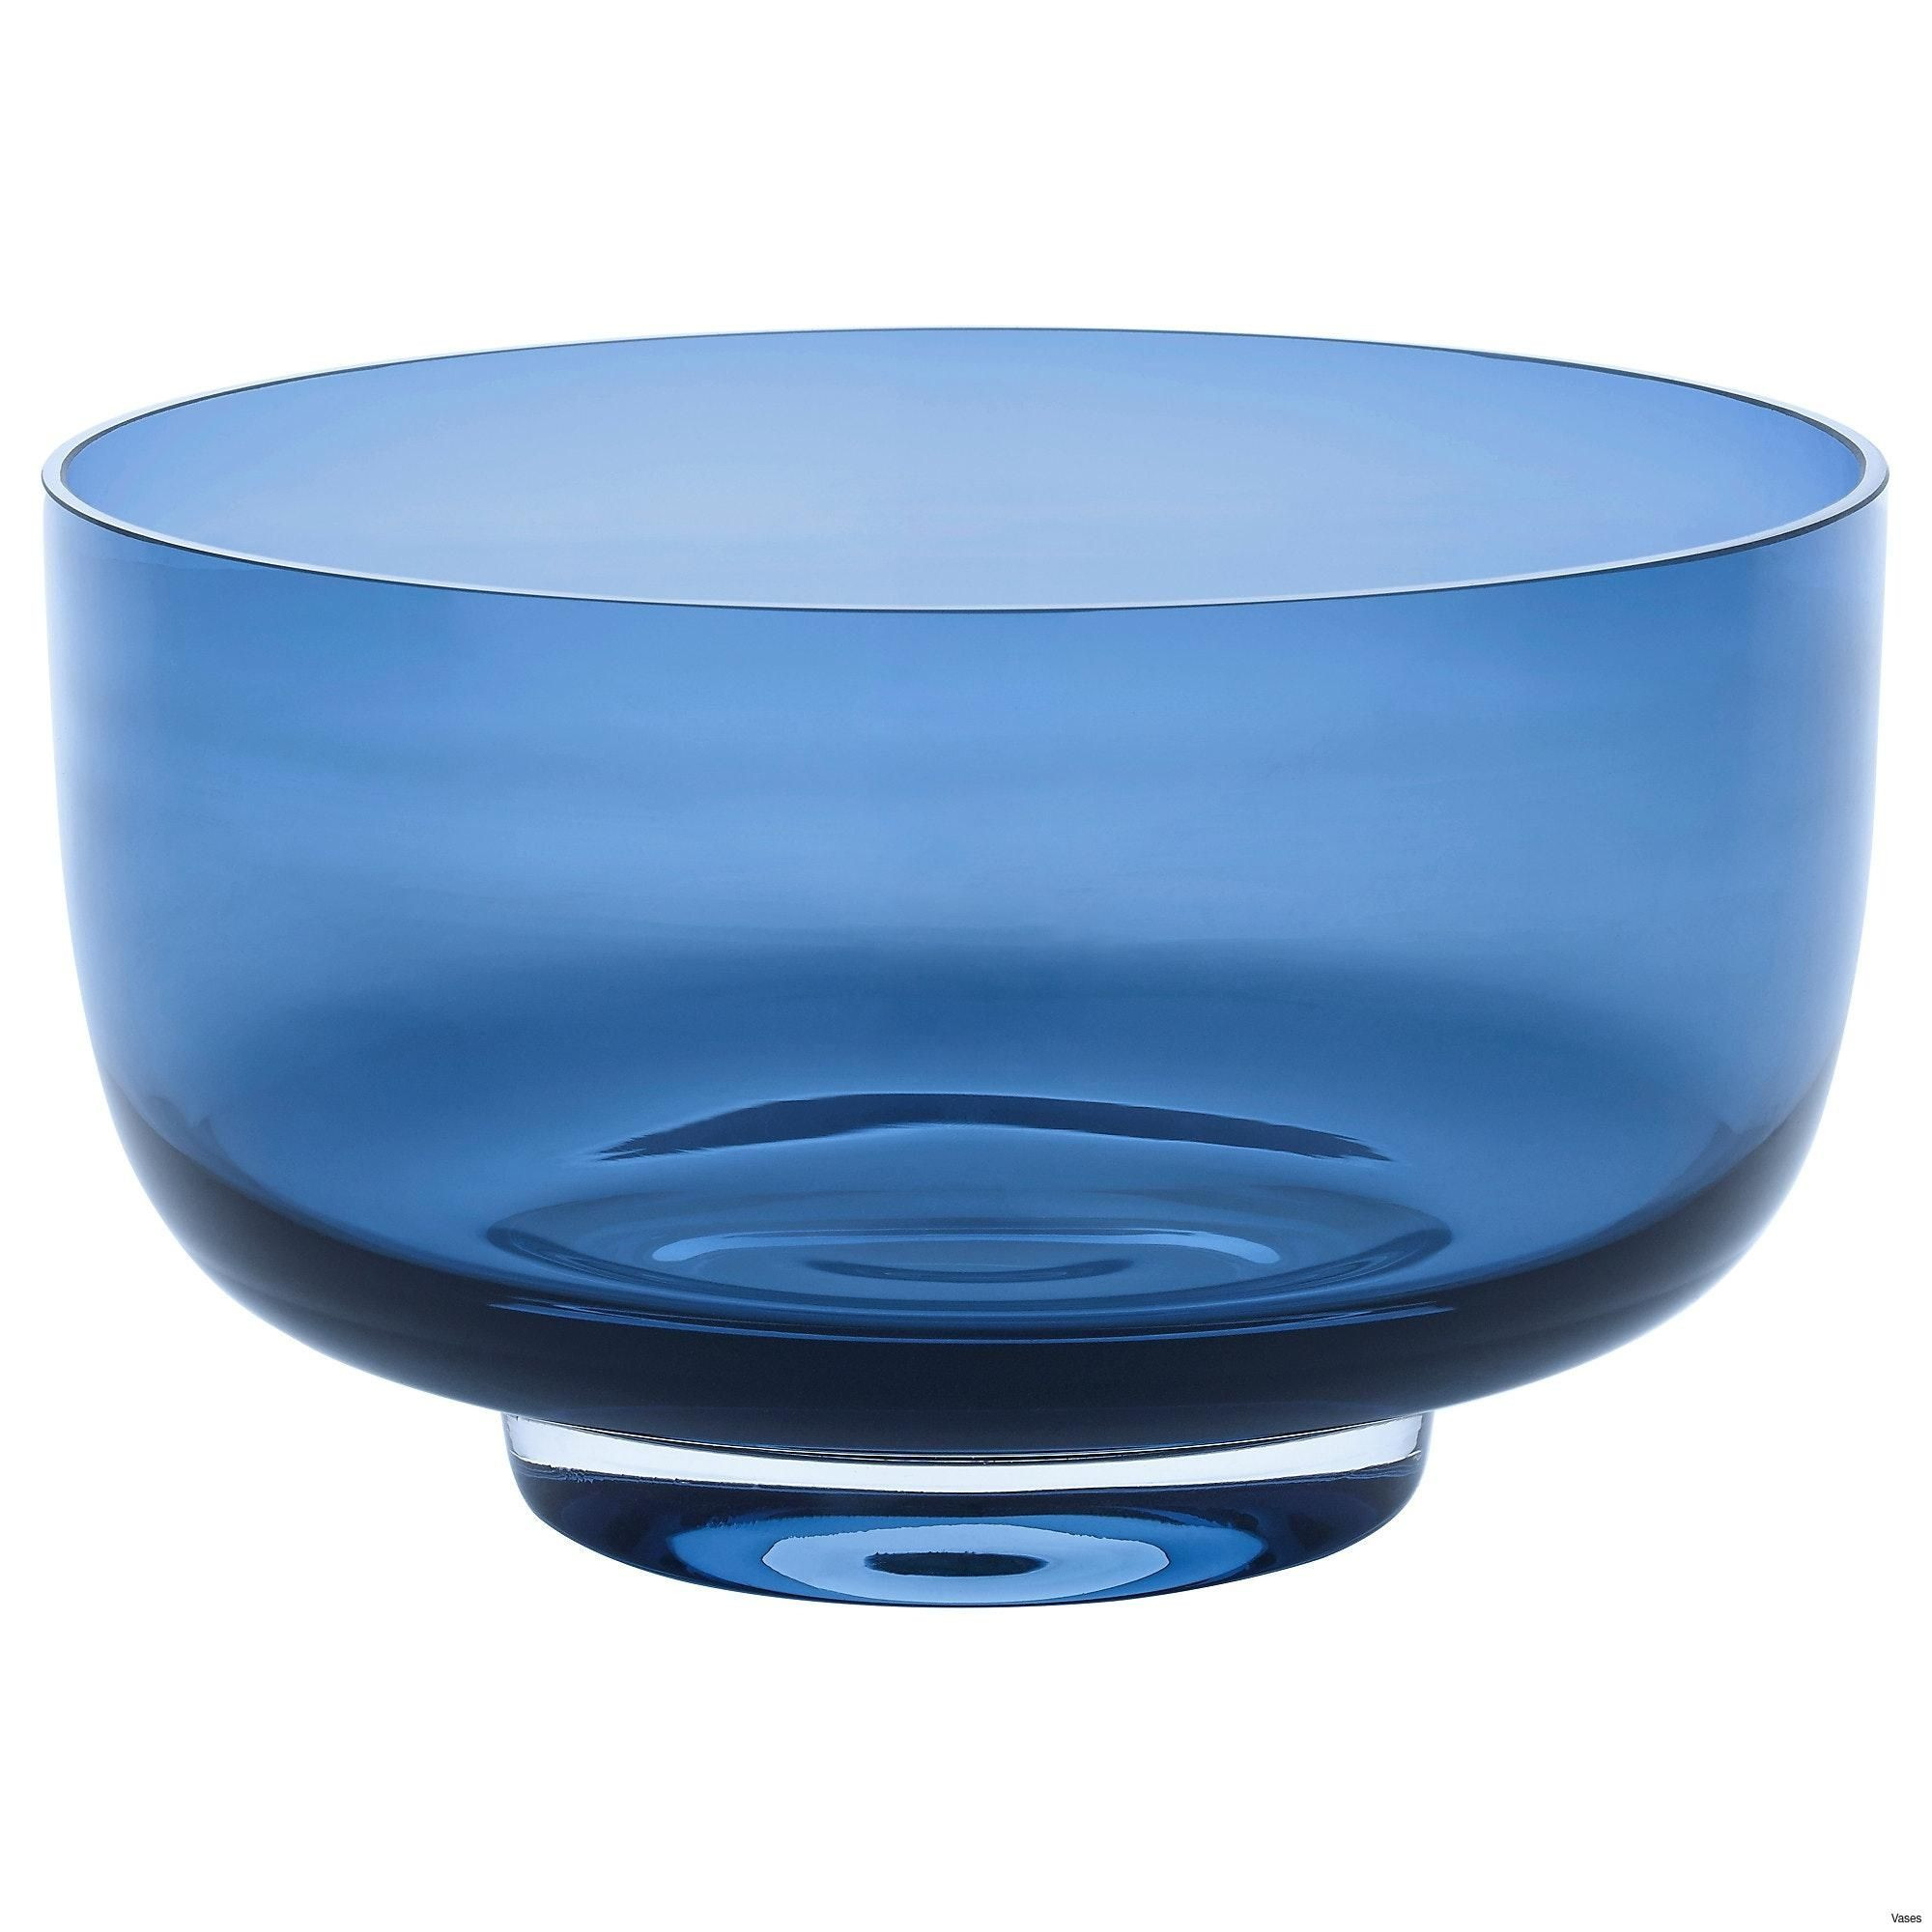 26 Lovable Tall Thin Blue Vase 2024 free download tall thin blue vase of 23 blue crystal vase the weekly world pertaining to decorative glass bowl new living room ikea vases awesome pe s5h